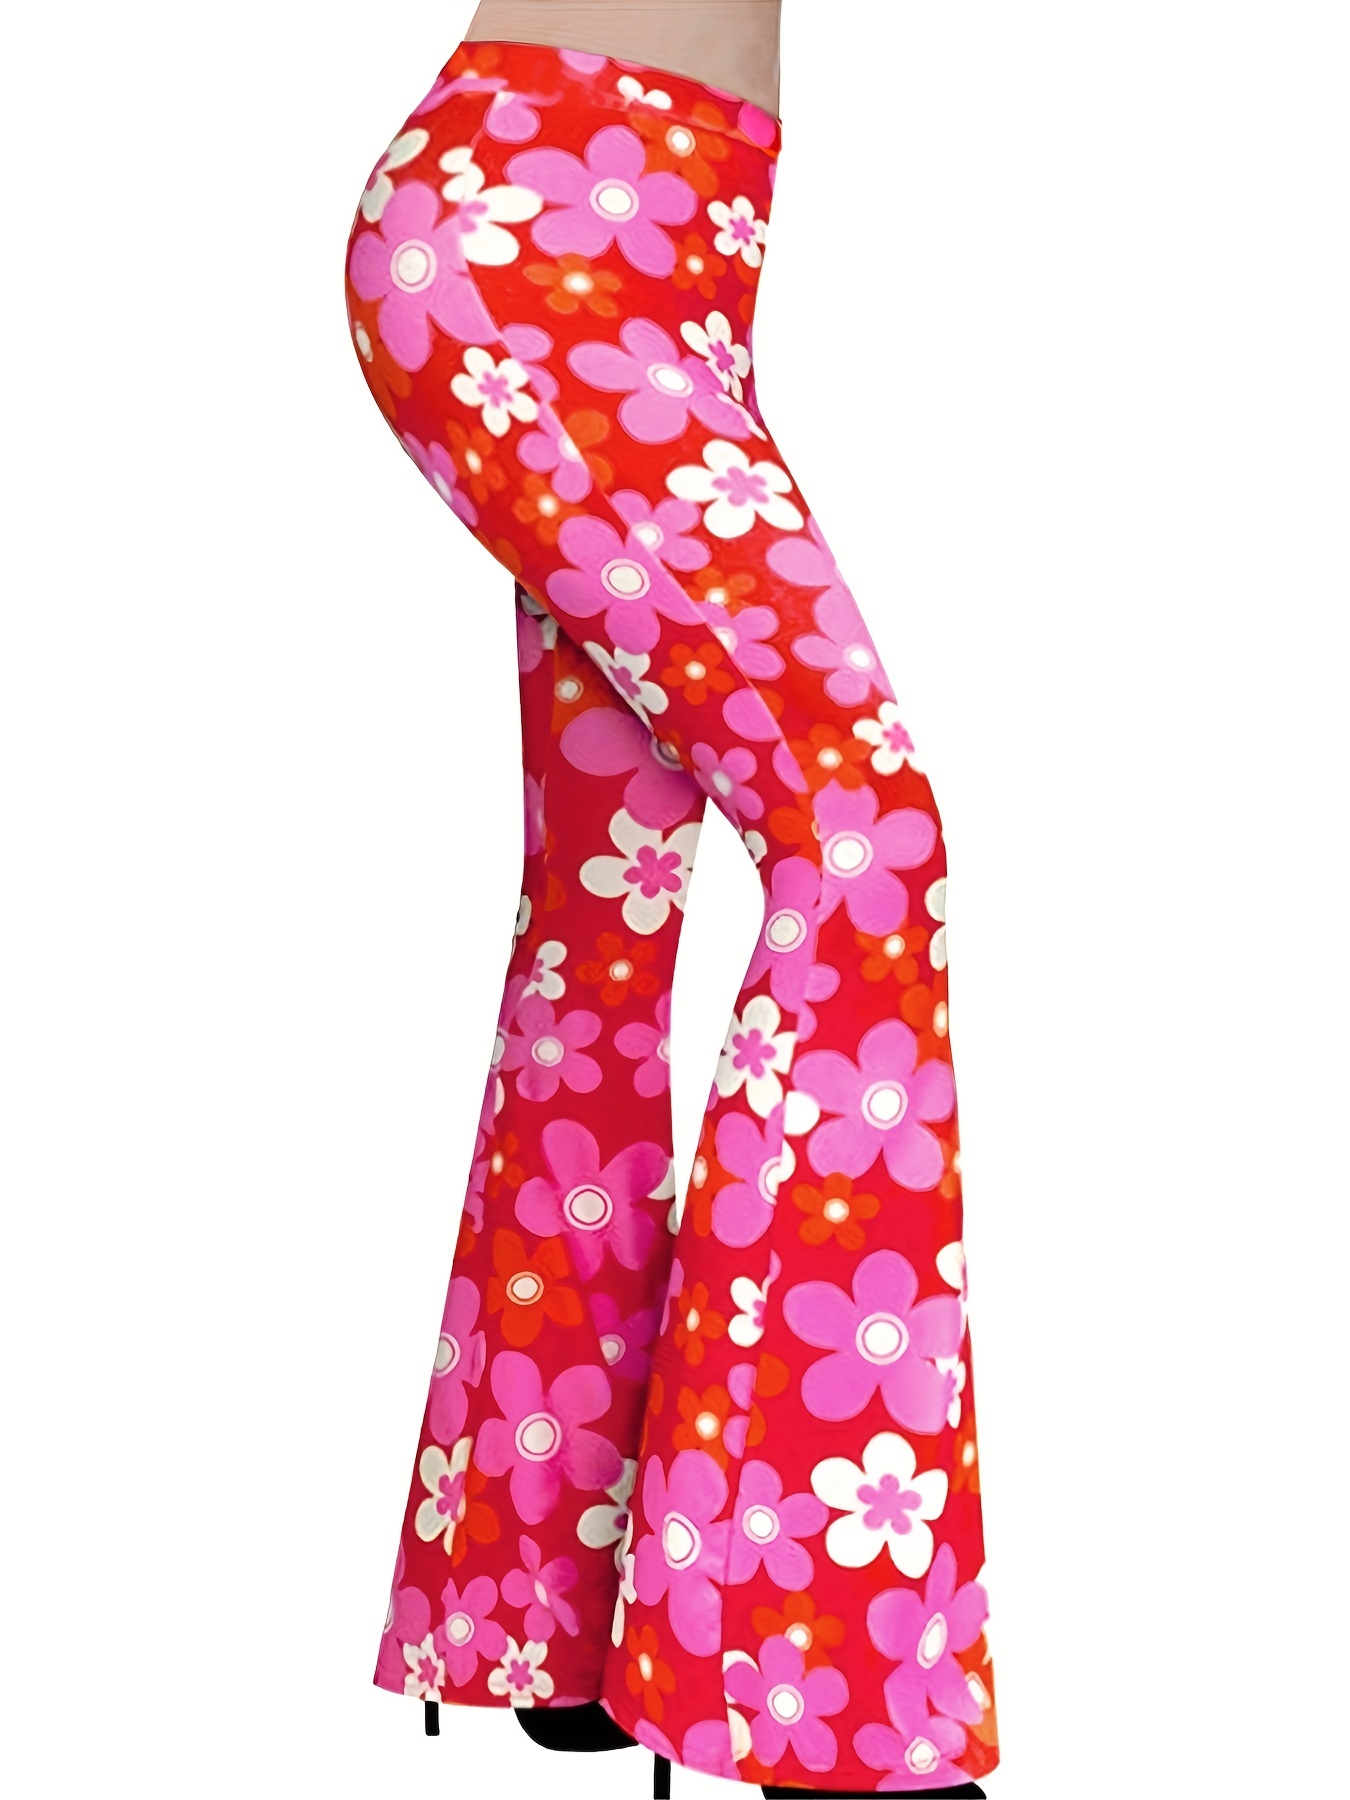 Floral Print Flare Leg Pants, Casual High Waist Elastic Pants For Spring &  Fall, Women's Clothing